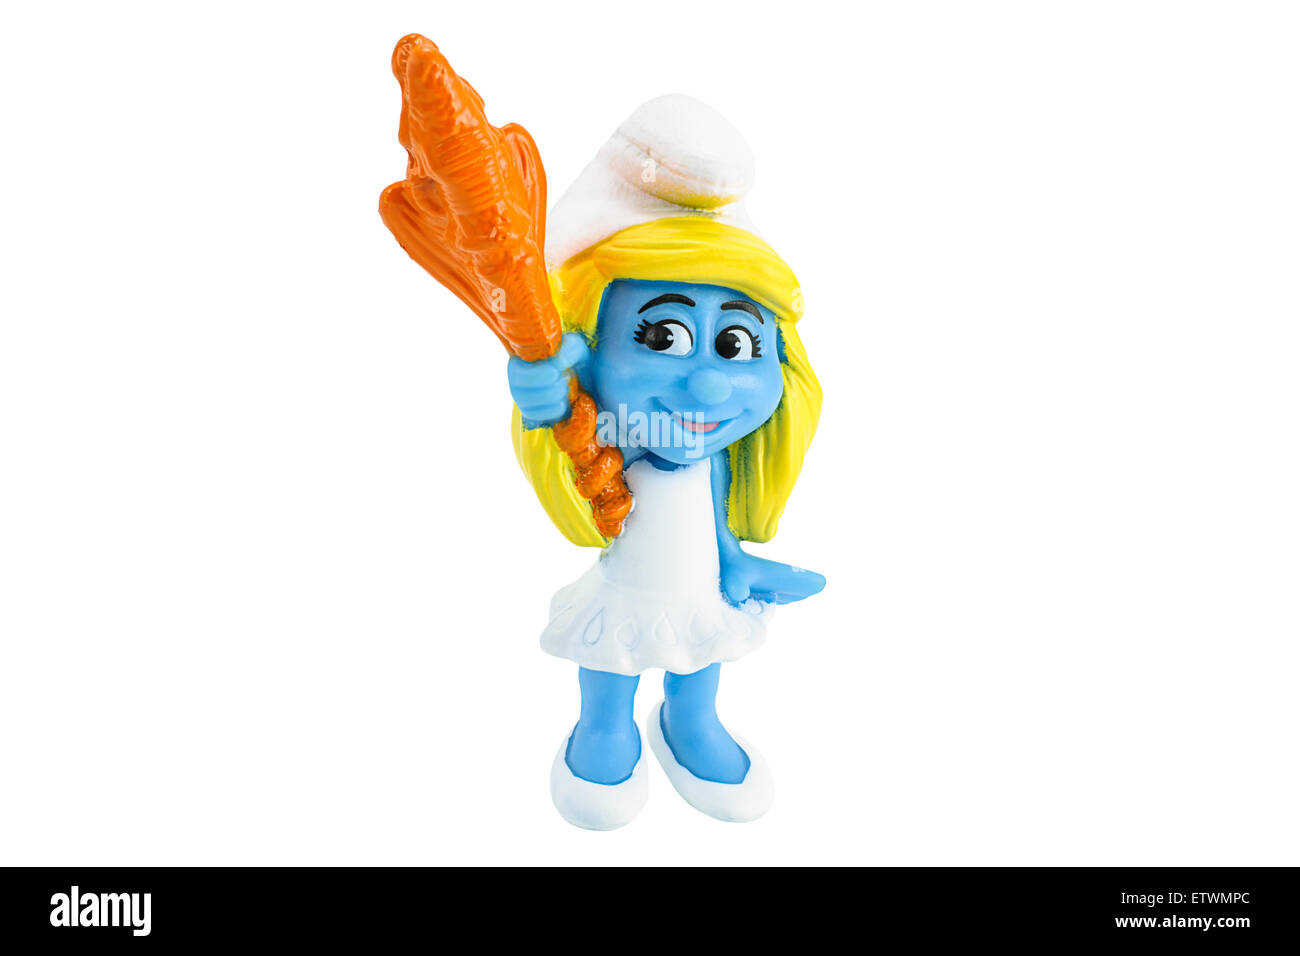 Bangkok,Thailand - February 17, 2014: Smurfette is a female Smurf who was created by Gargamel toy figure model character from Th Stock Photo